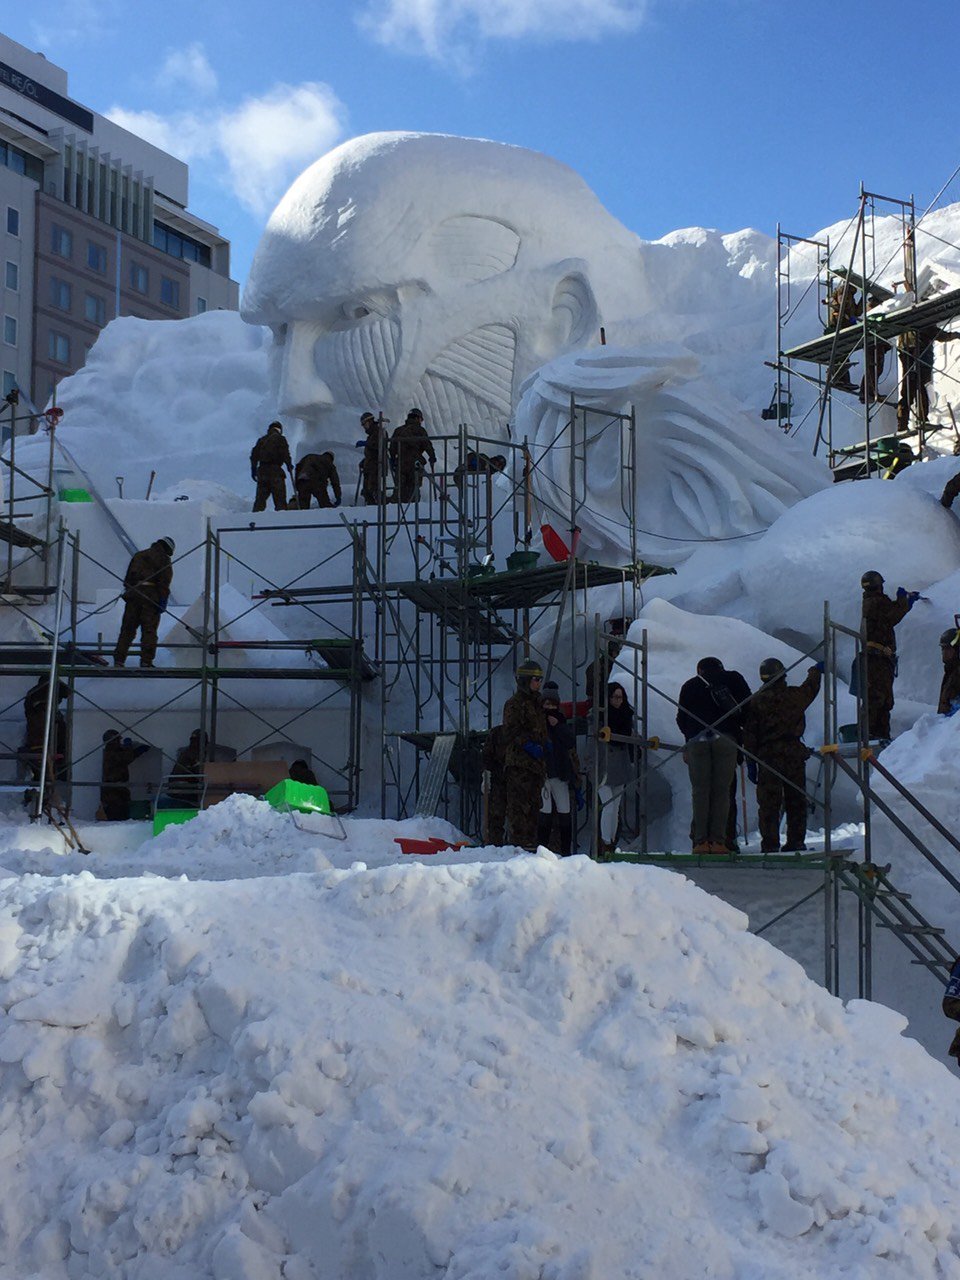 Close-ups of the Colossal Titan model and actual snow sculpture under construction,